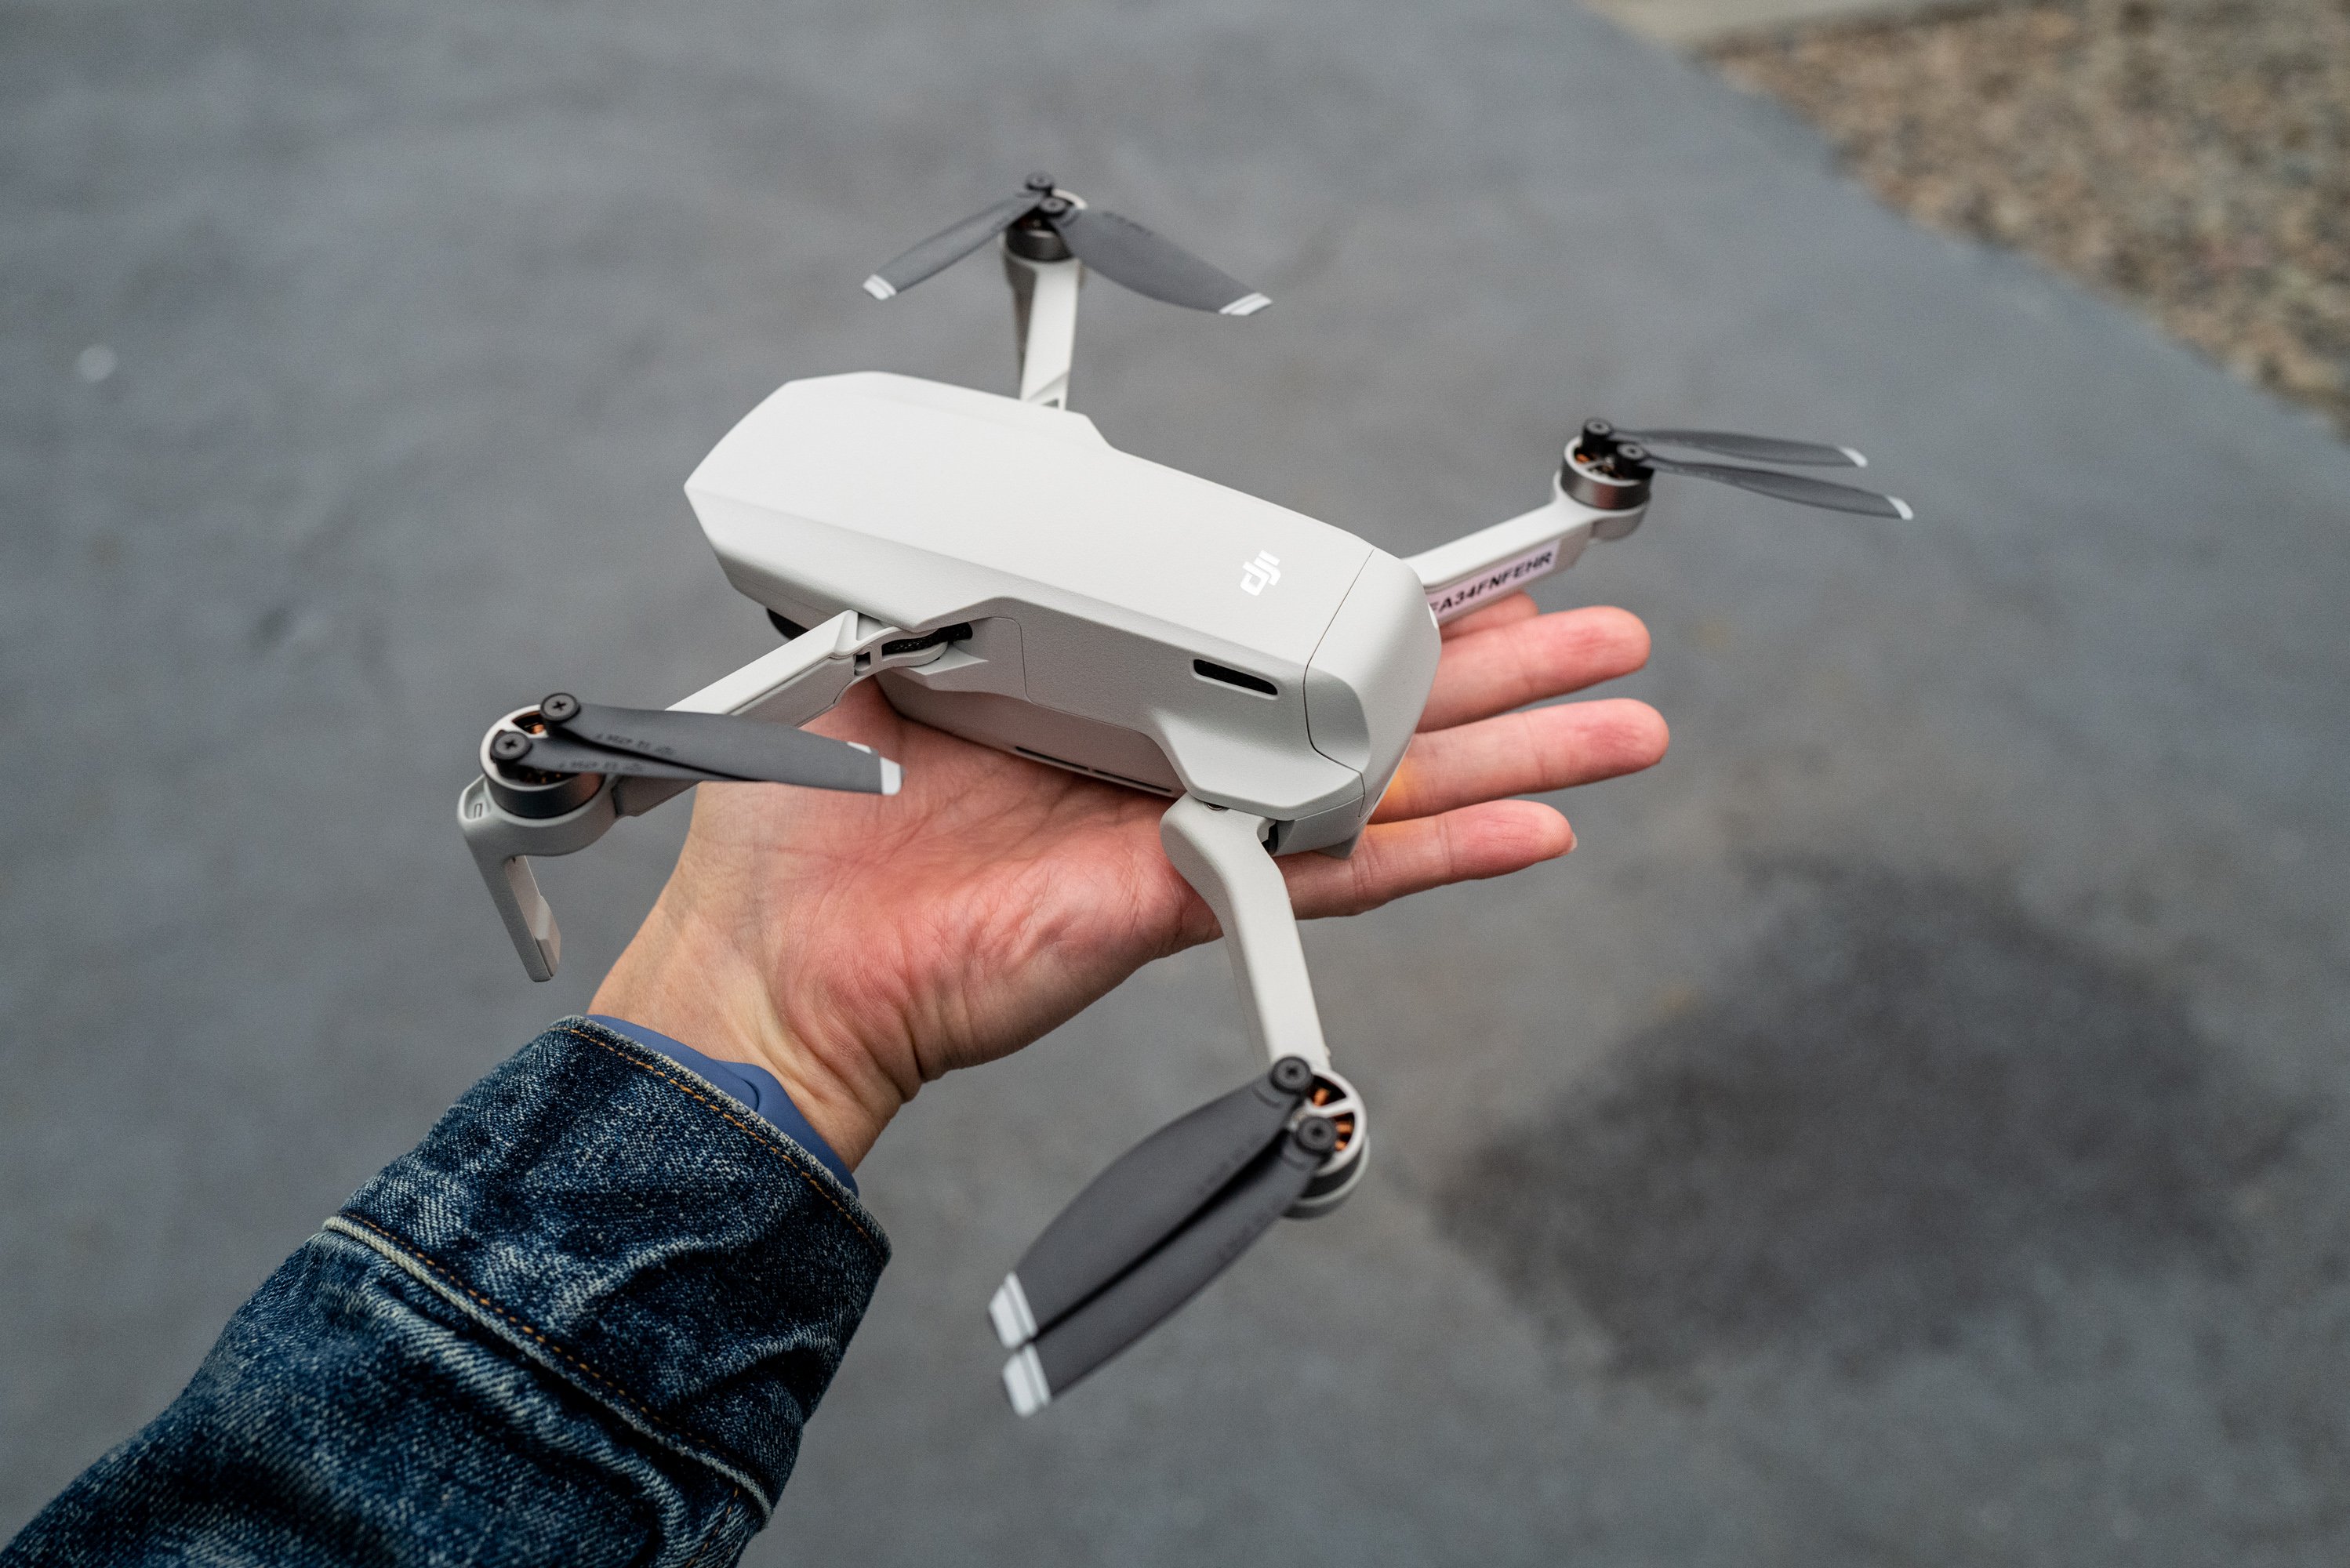 Mavic Mini Drone from DJI Packs a Punch at Under 250g YourTechReport